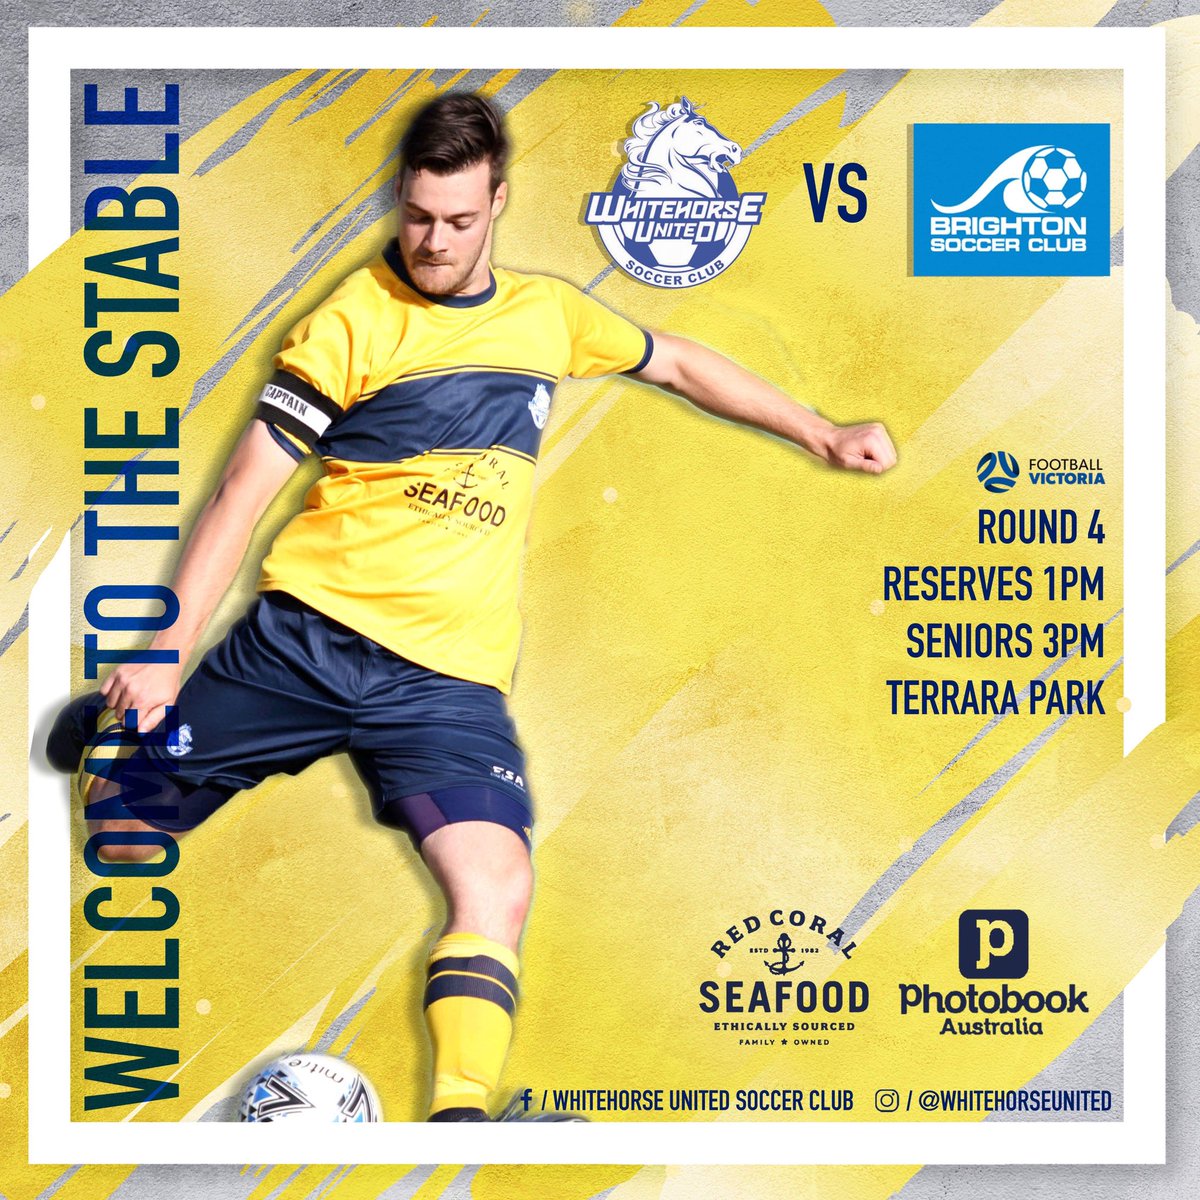 GAMEDAY! Our men take on Brighton today at Terrara. Can we make it 2 from 2 or will Brighton continue their perfect start to 2019?